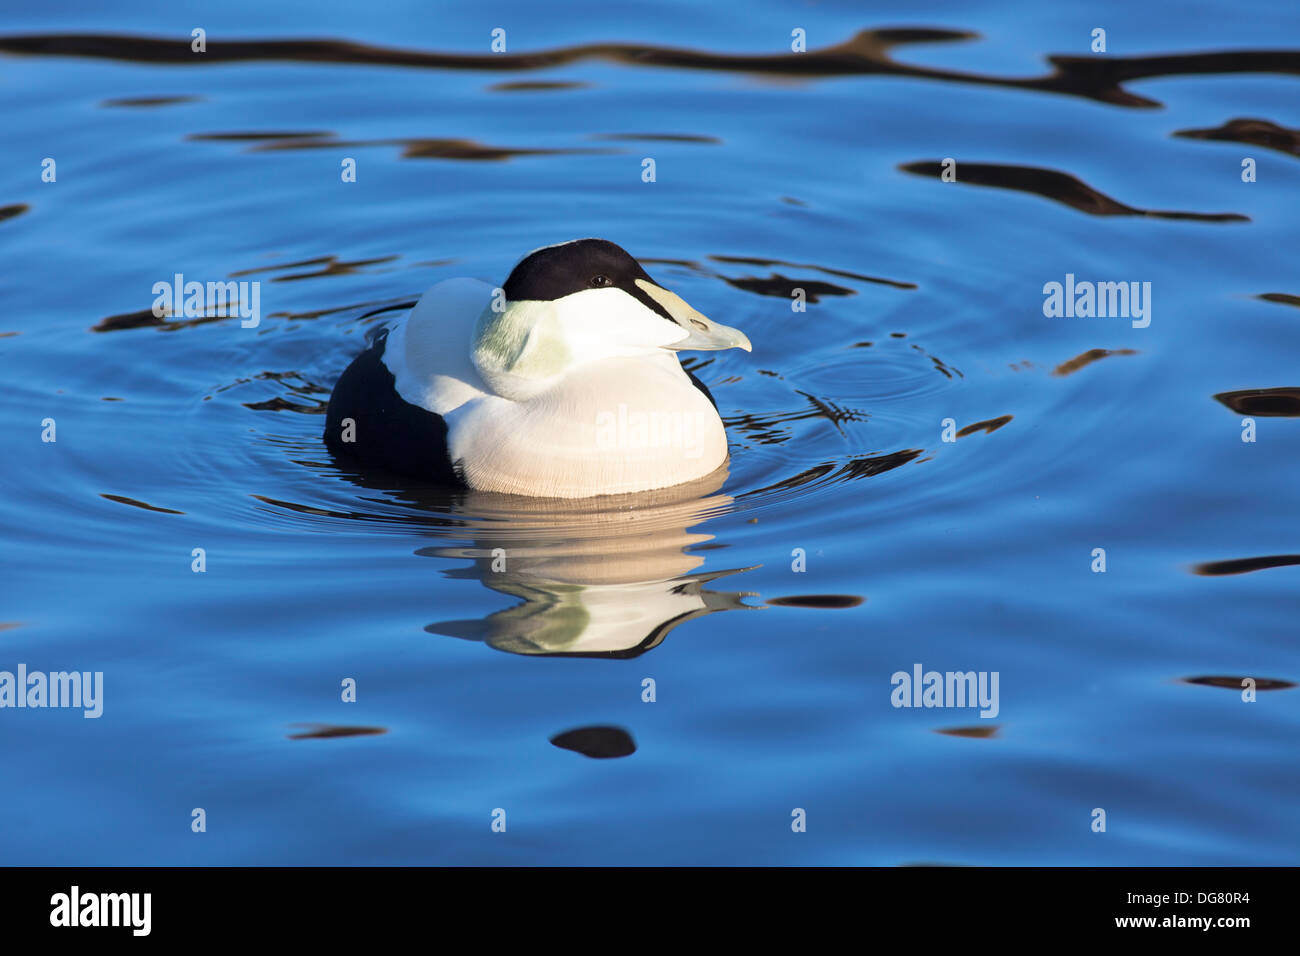 Male Common Eider Duck swimming on water. Stock Photo